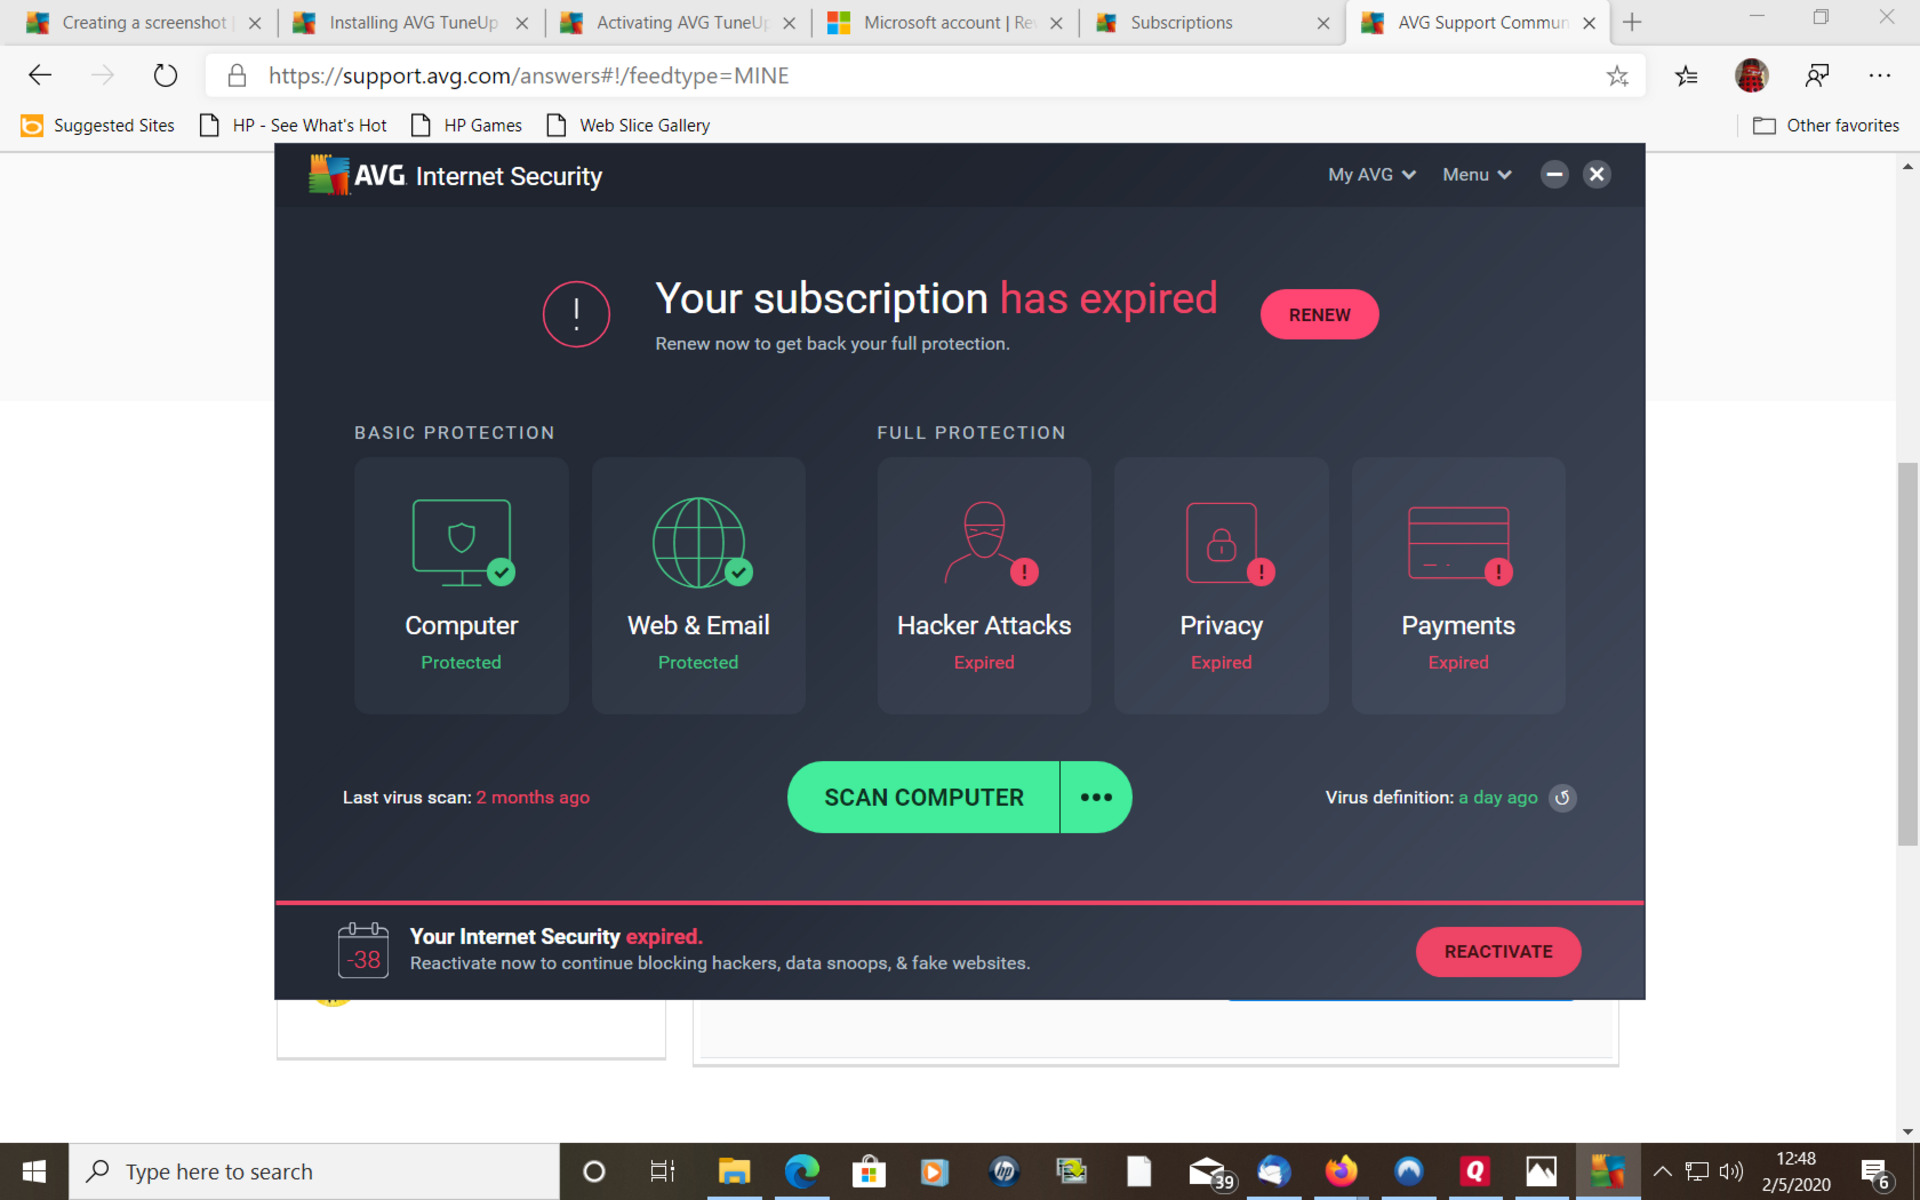 How To See Expiration Date On Avast Internet Security